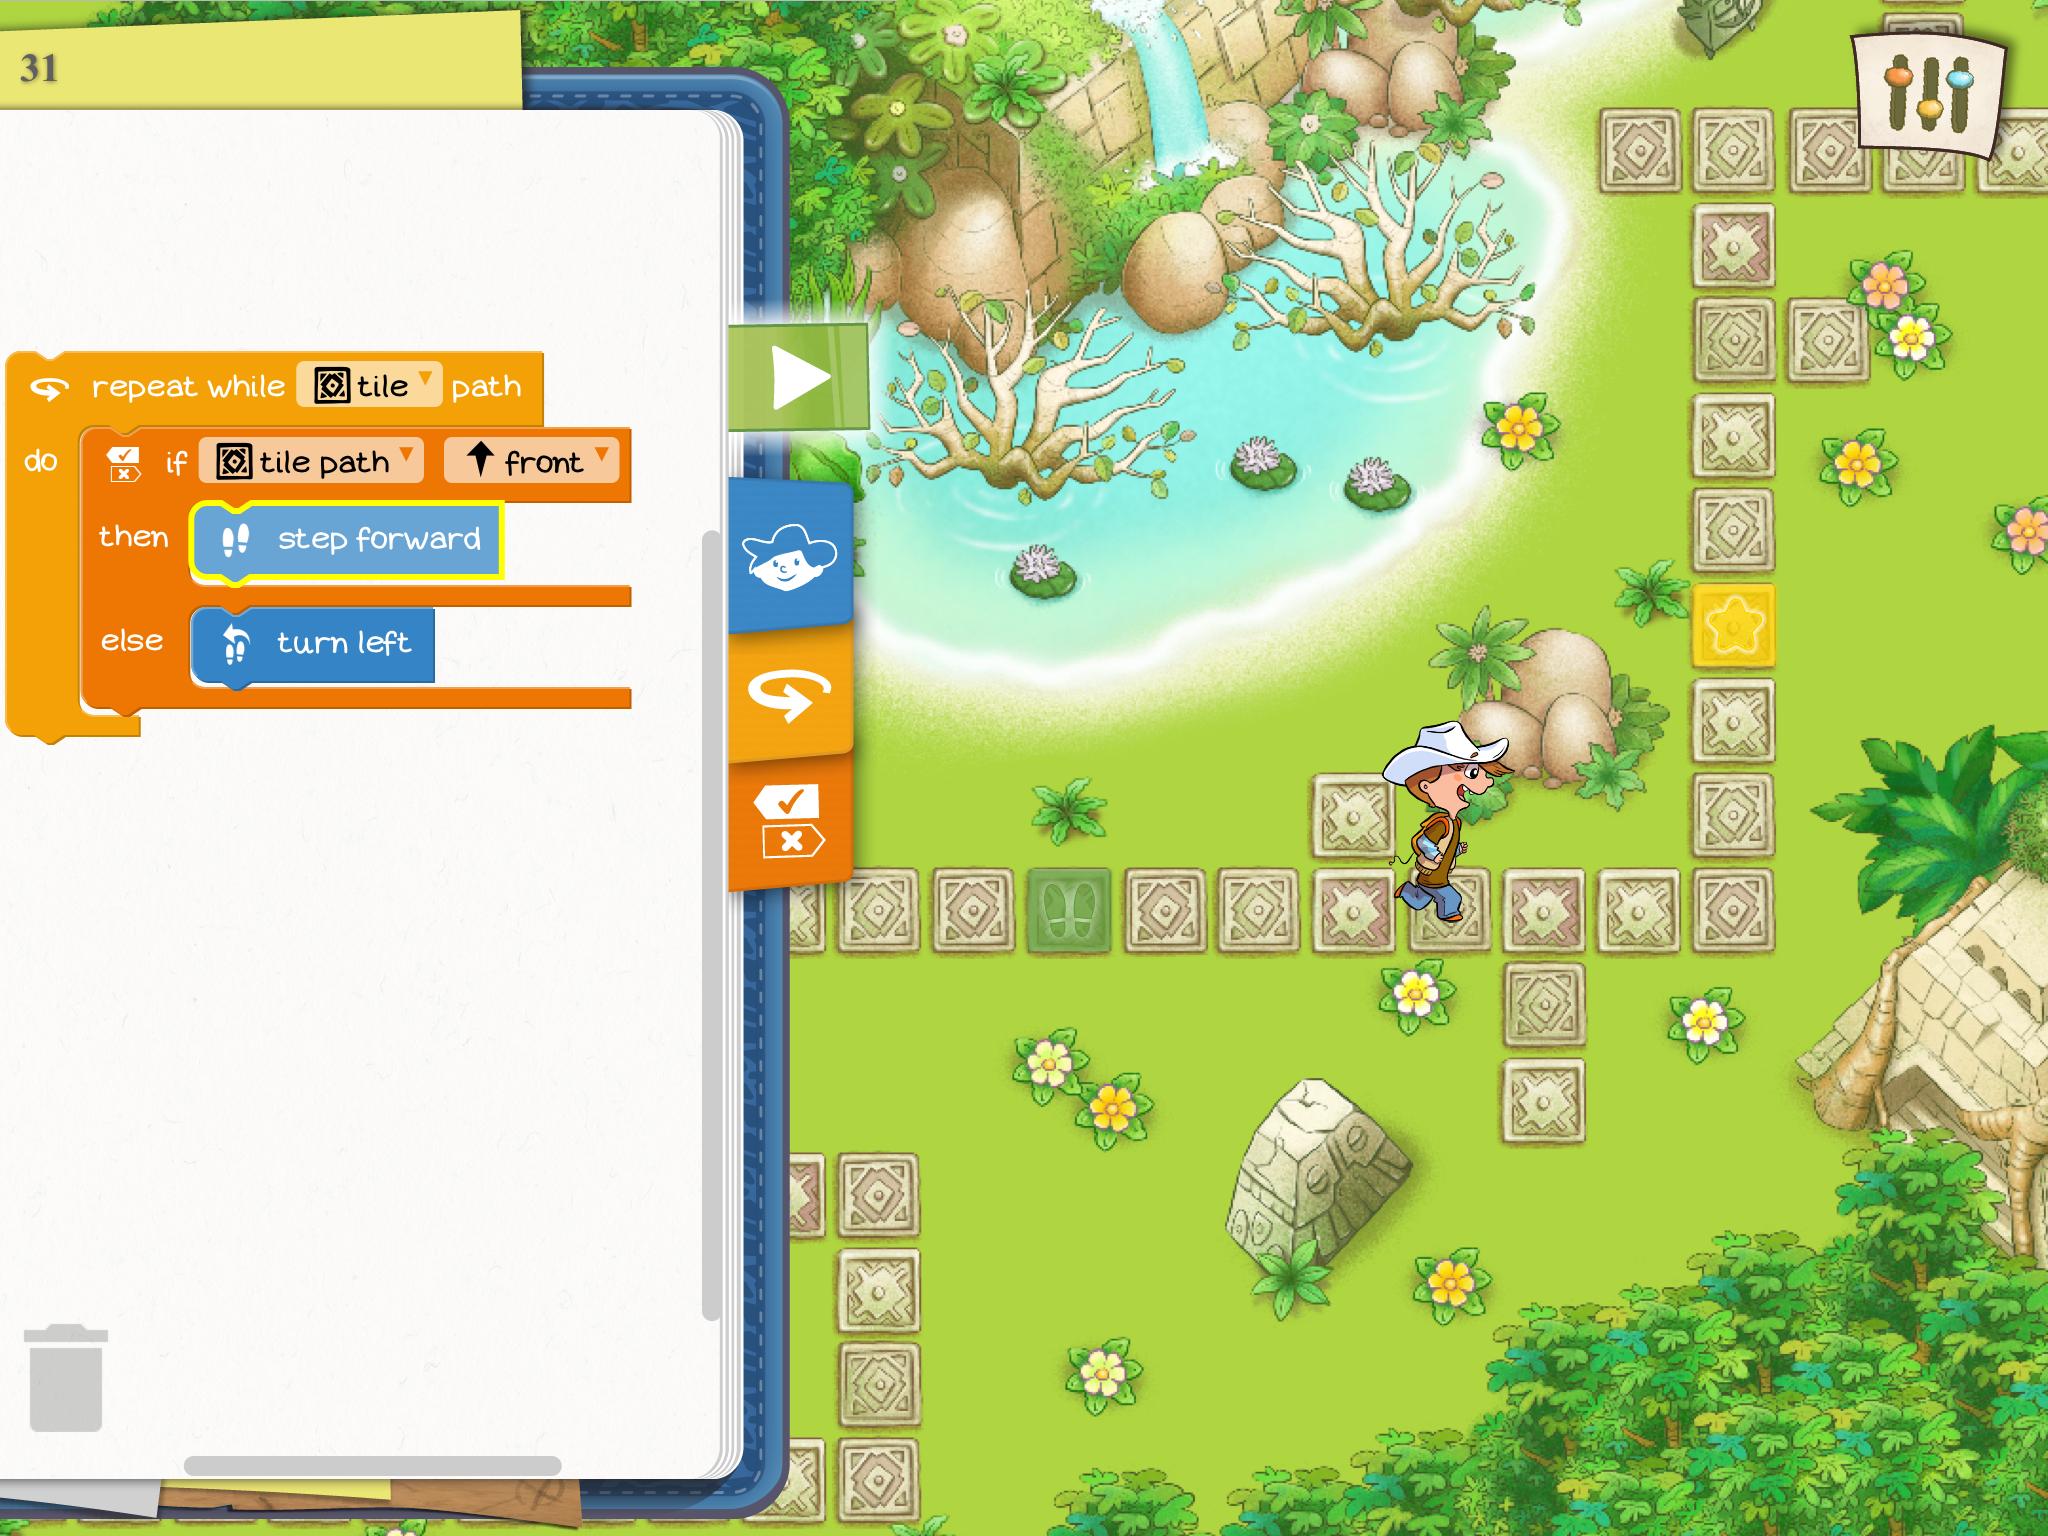 Coding Program for 8 year olds: Learn Coding Through Games